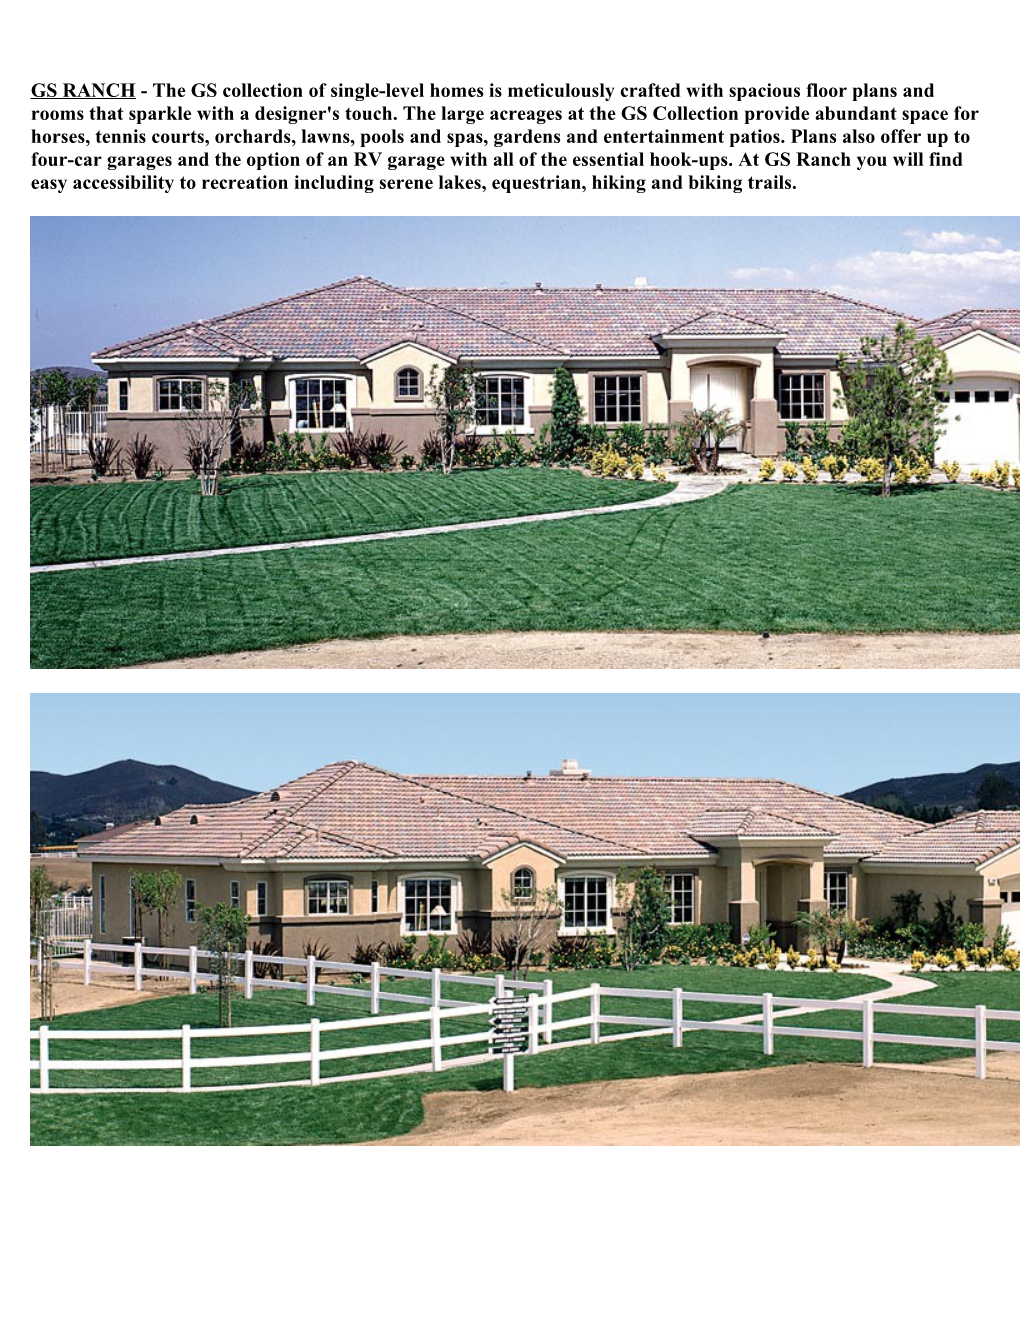 GS RANCH - the GS Collection of Single-Level Homes Is Meticulously Crafted with Spacious